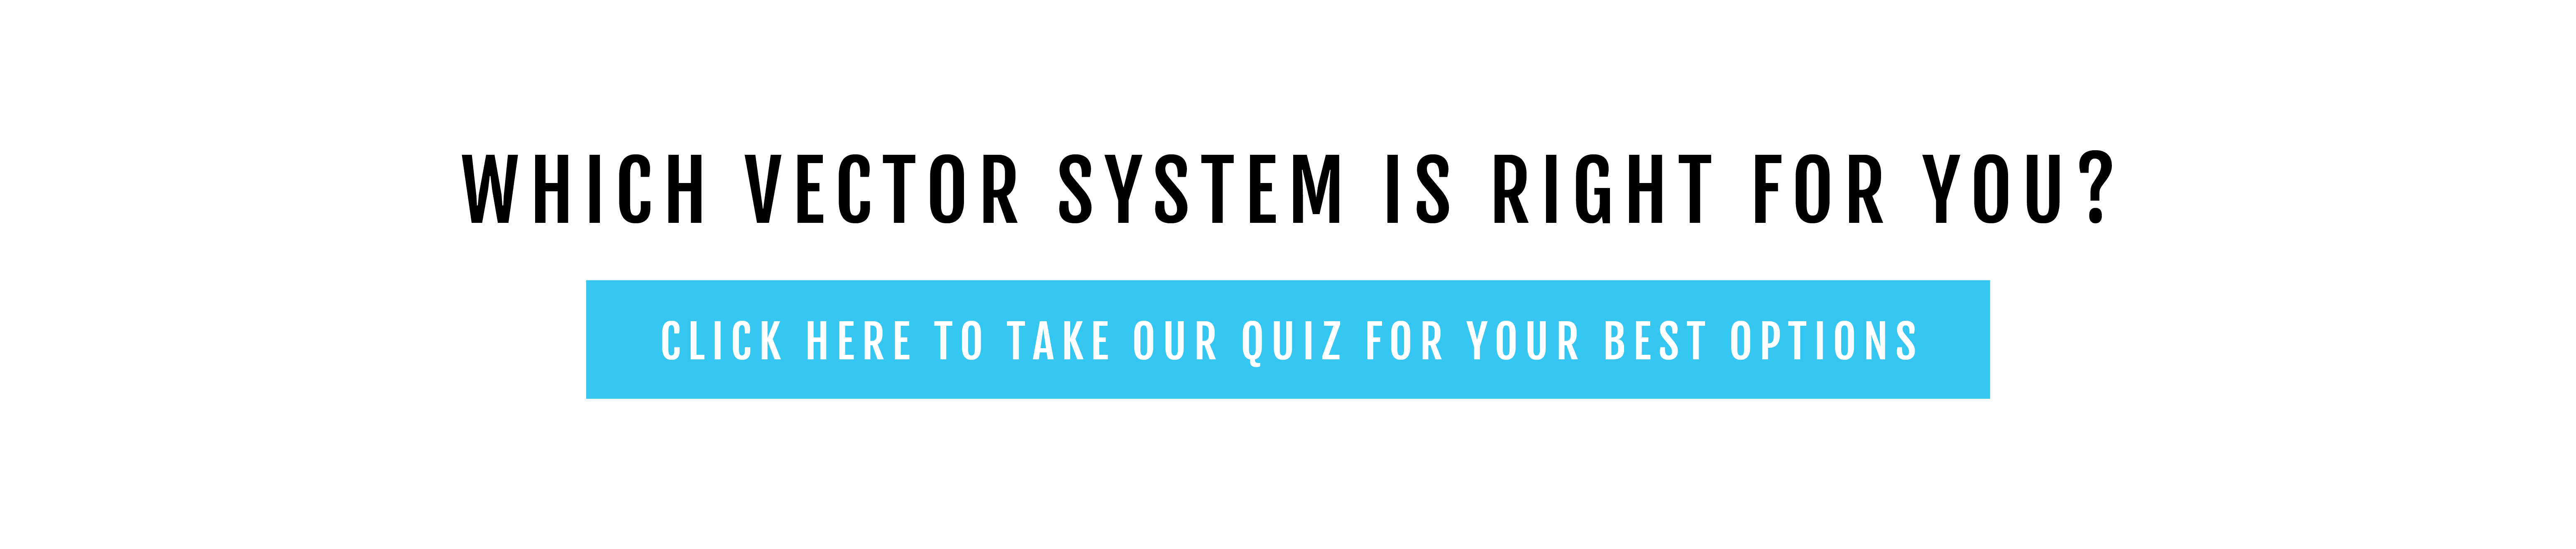 which kayezen system is right for you?